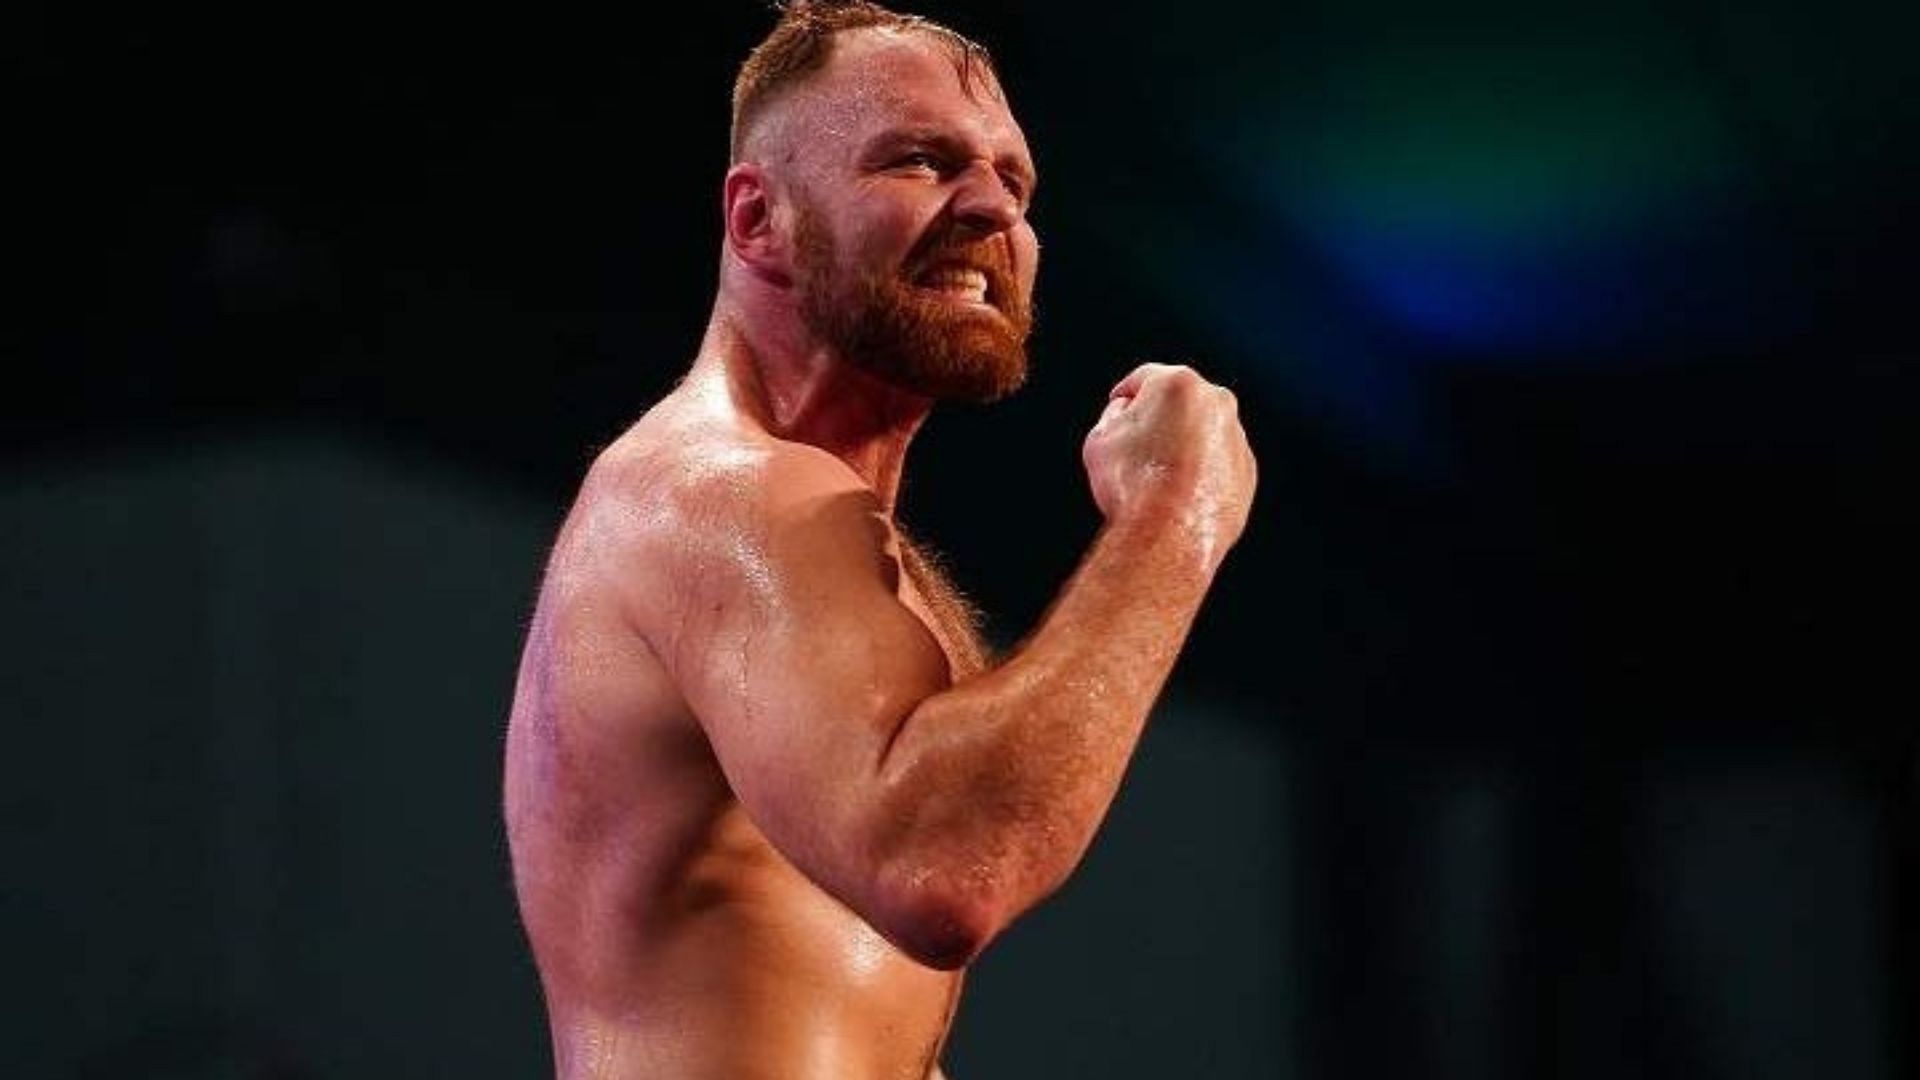 Jon Moxley is a former AEW World Champion and a member of the Blackpool Combat Club